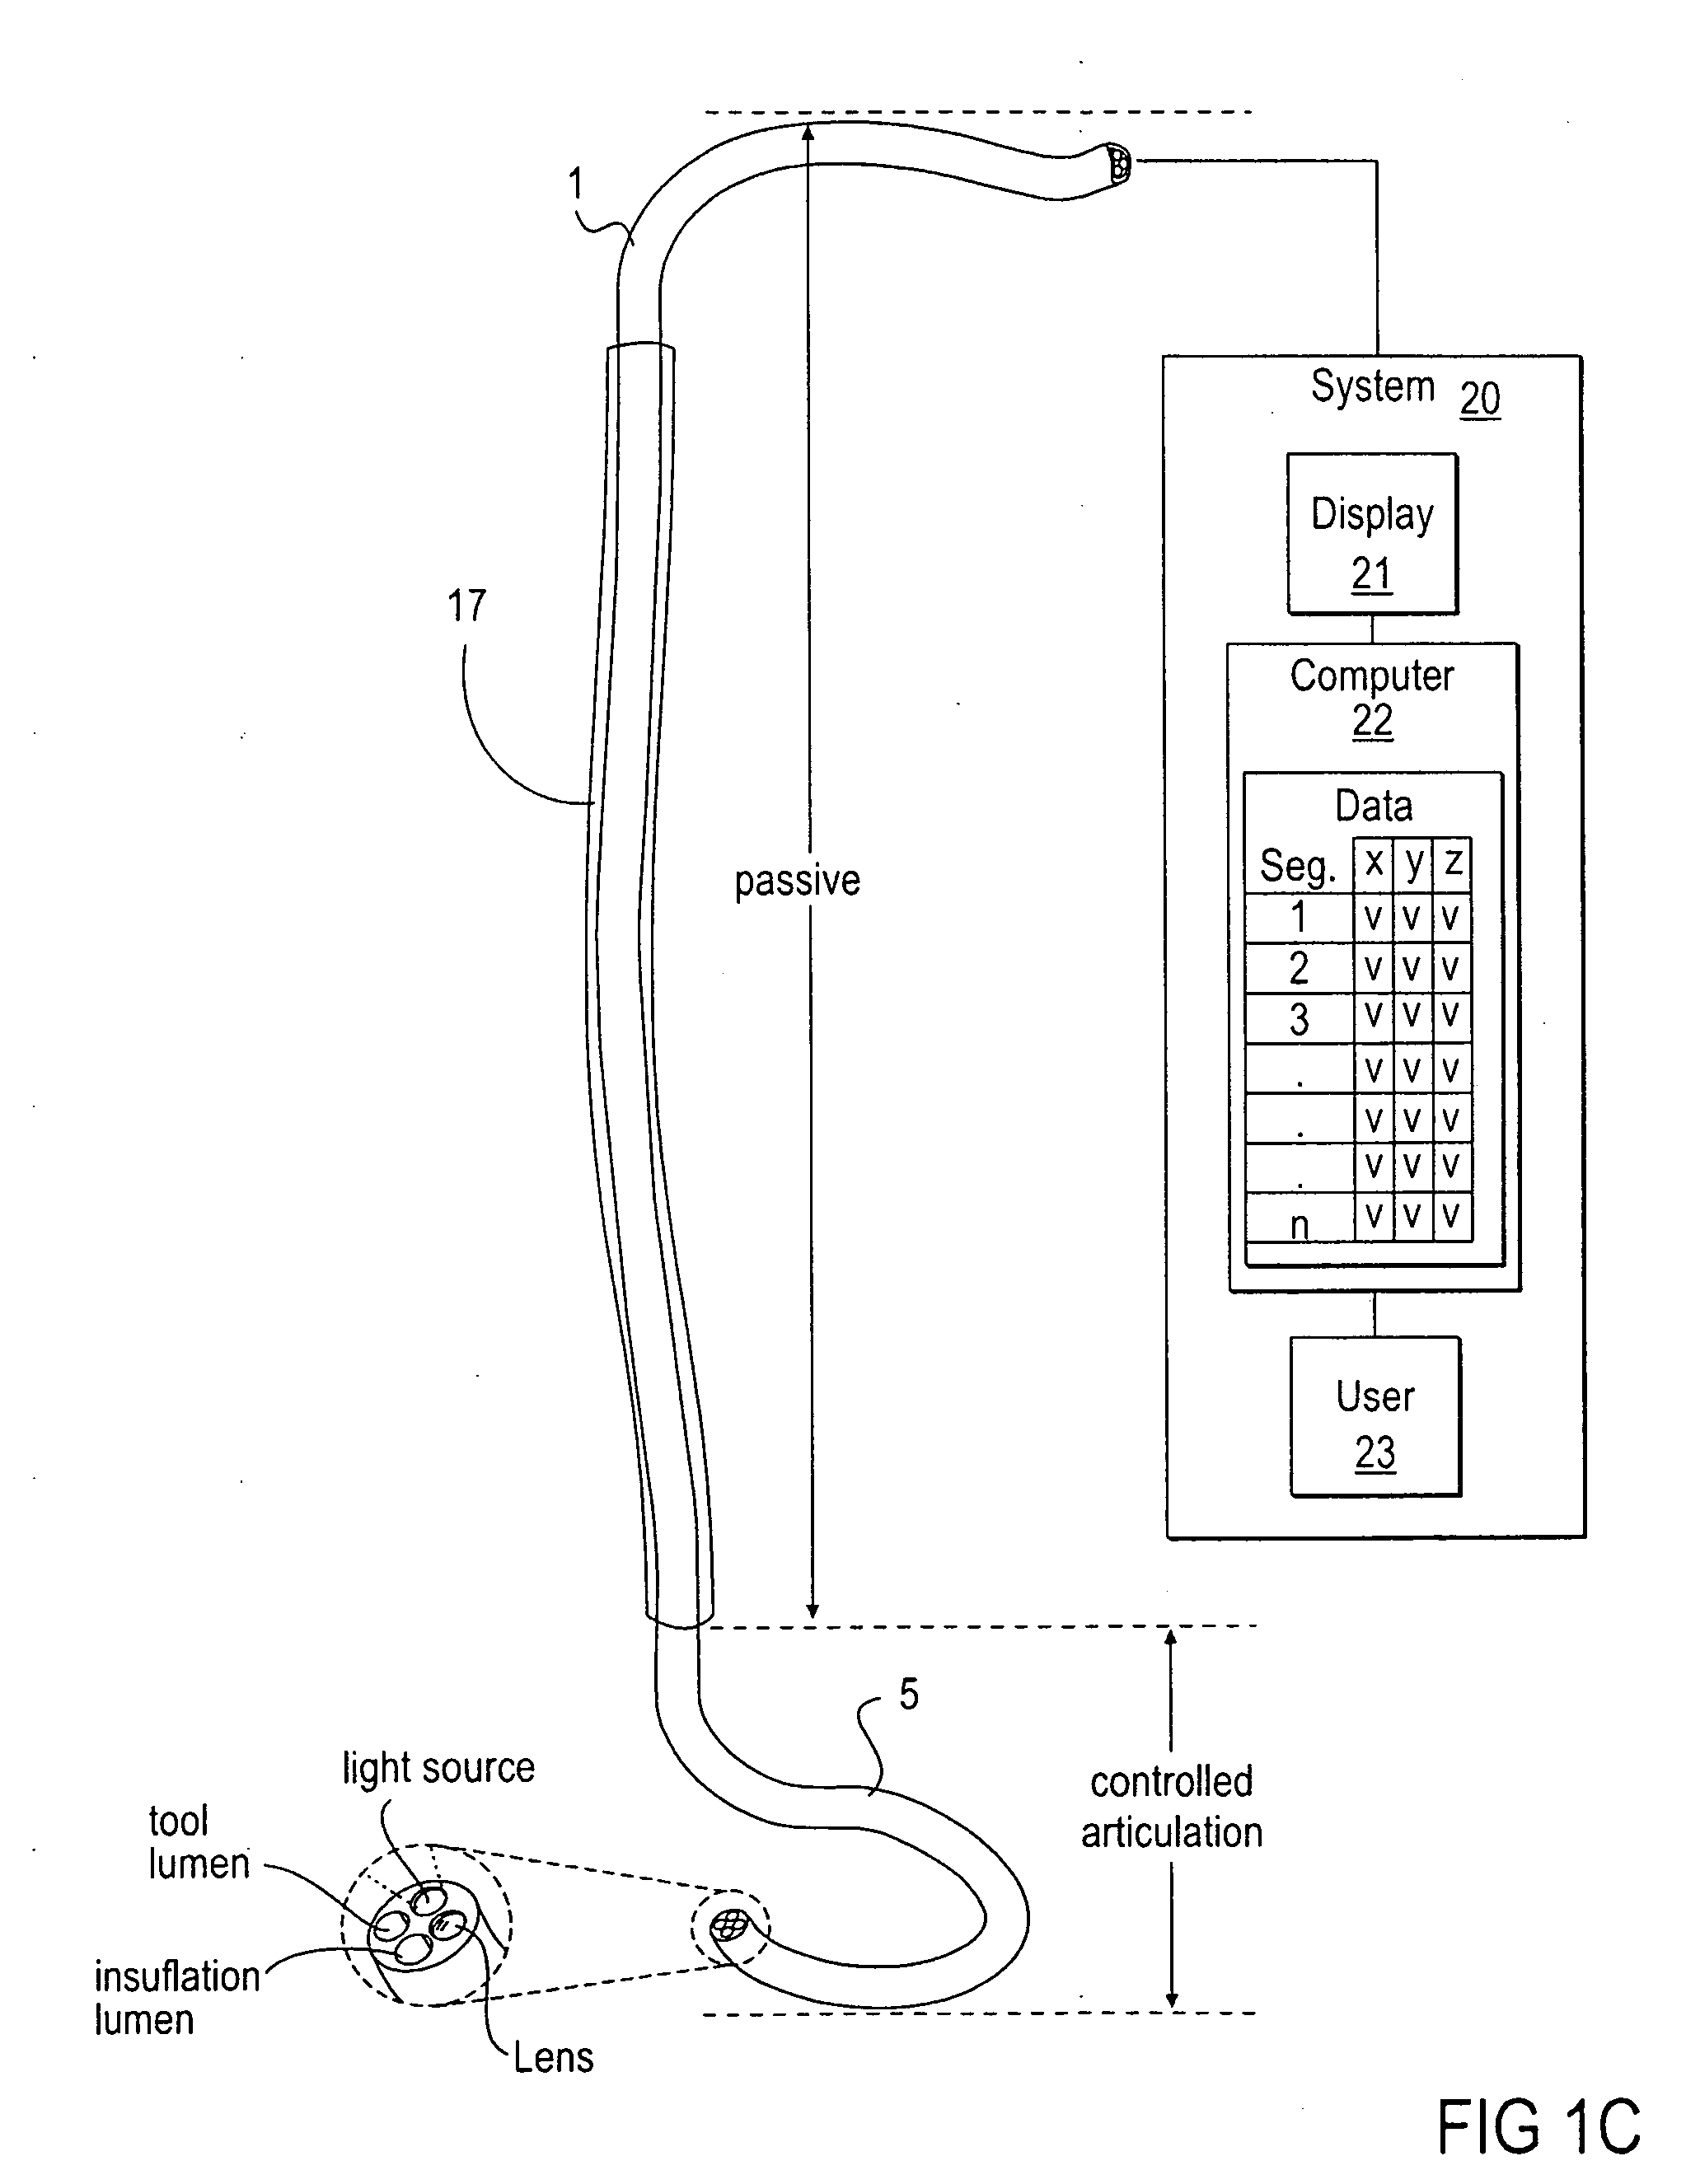 Methods and apparatus for performing transluminal and other procedures